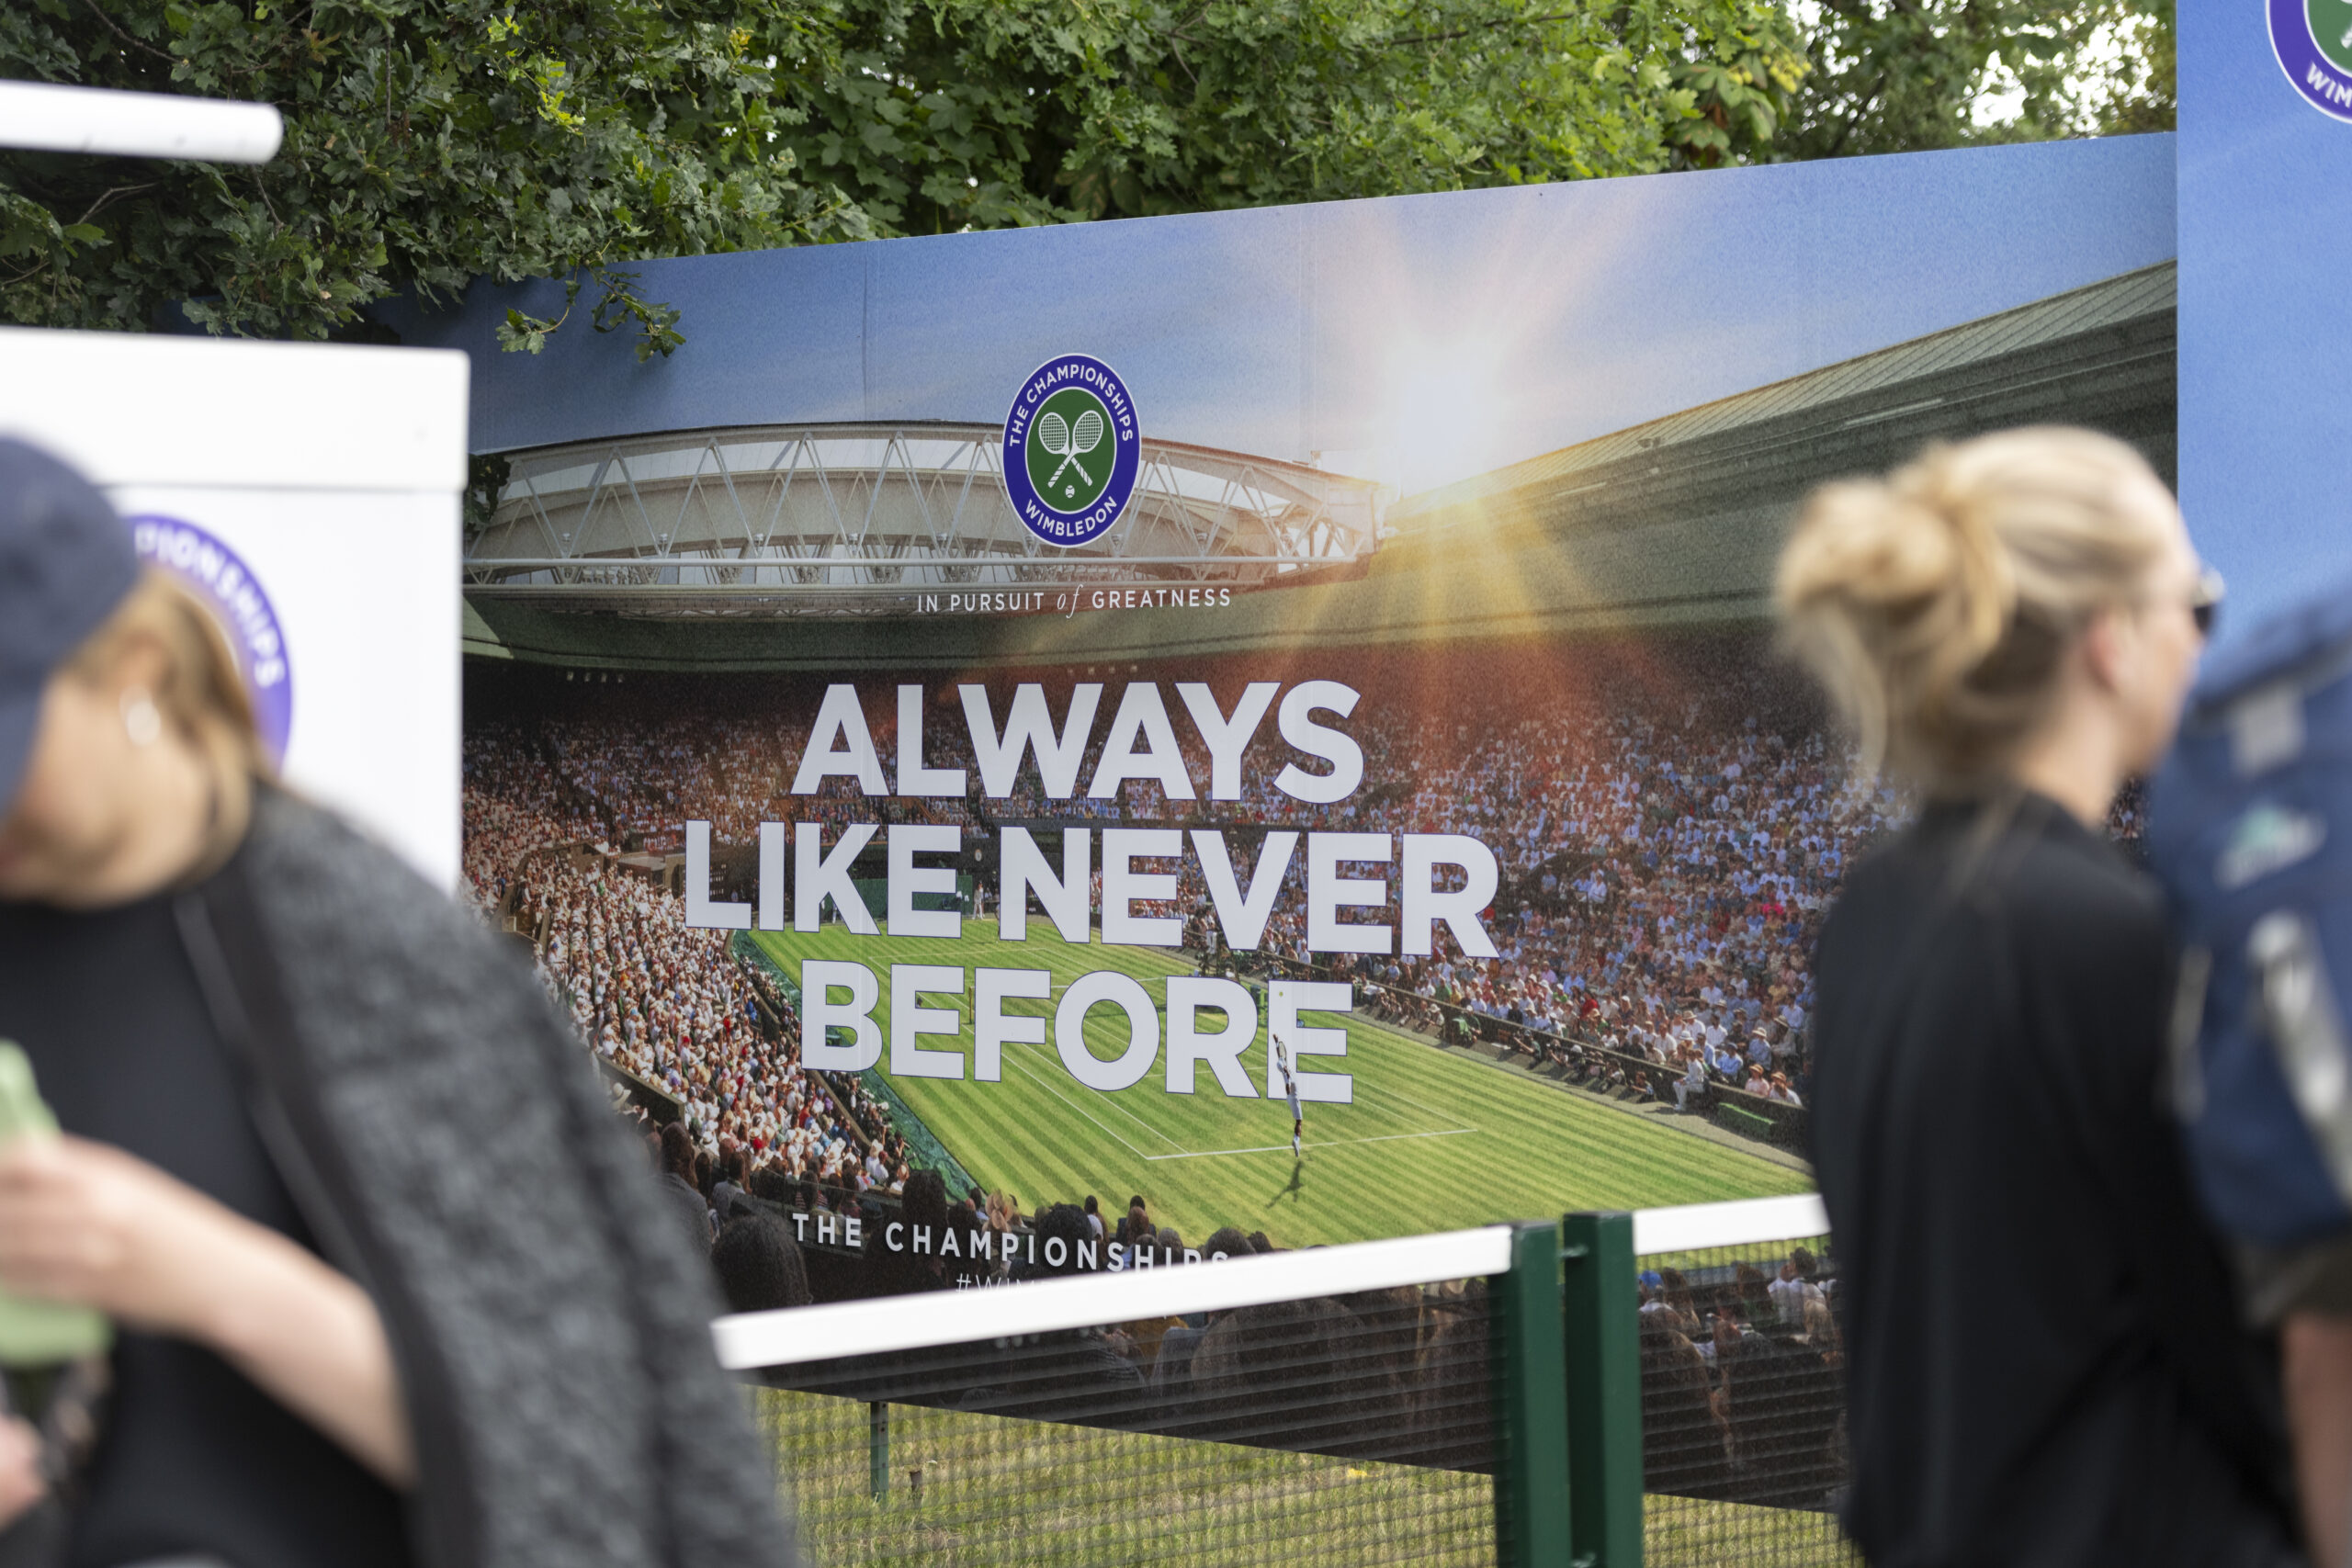 Tennis fans arriving at Wimbledon welcomed by OOH campaign created by Space